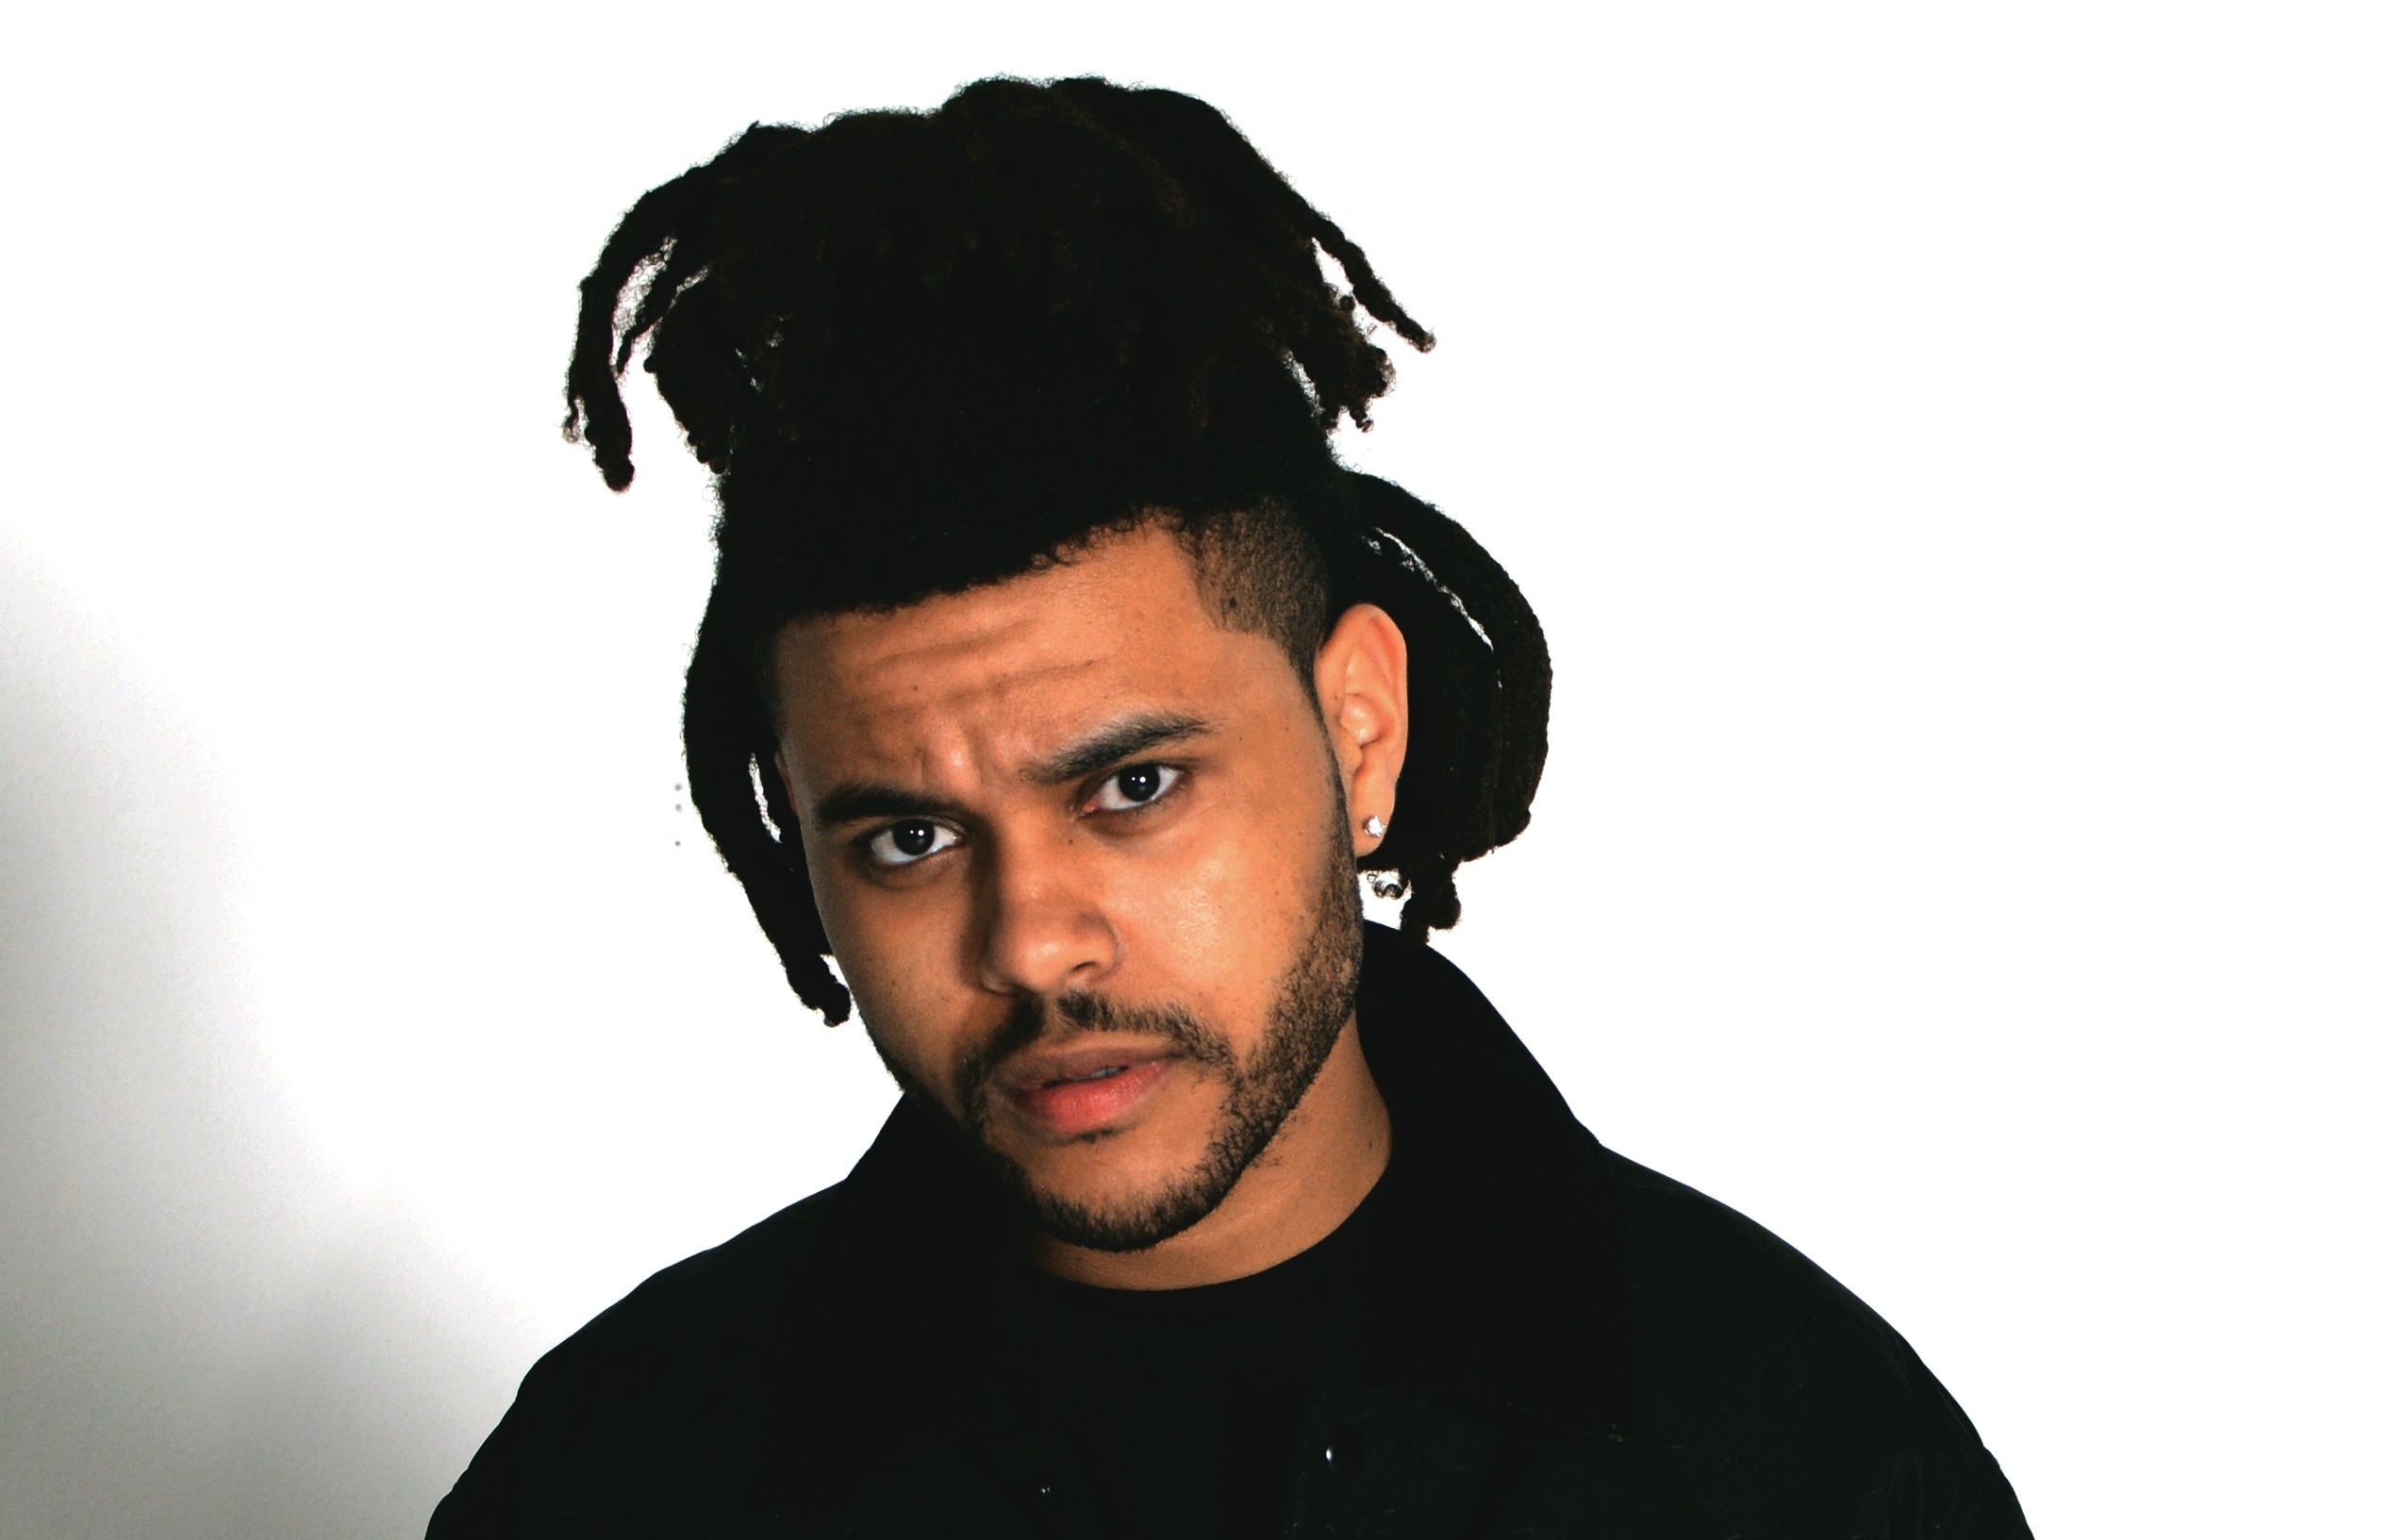 Thinking about the weekend. The Weeknd. Weekend певец. The Weeknd фото. The Weeknd 2015.